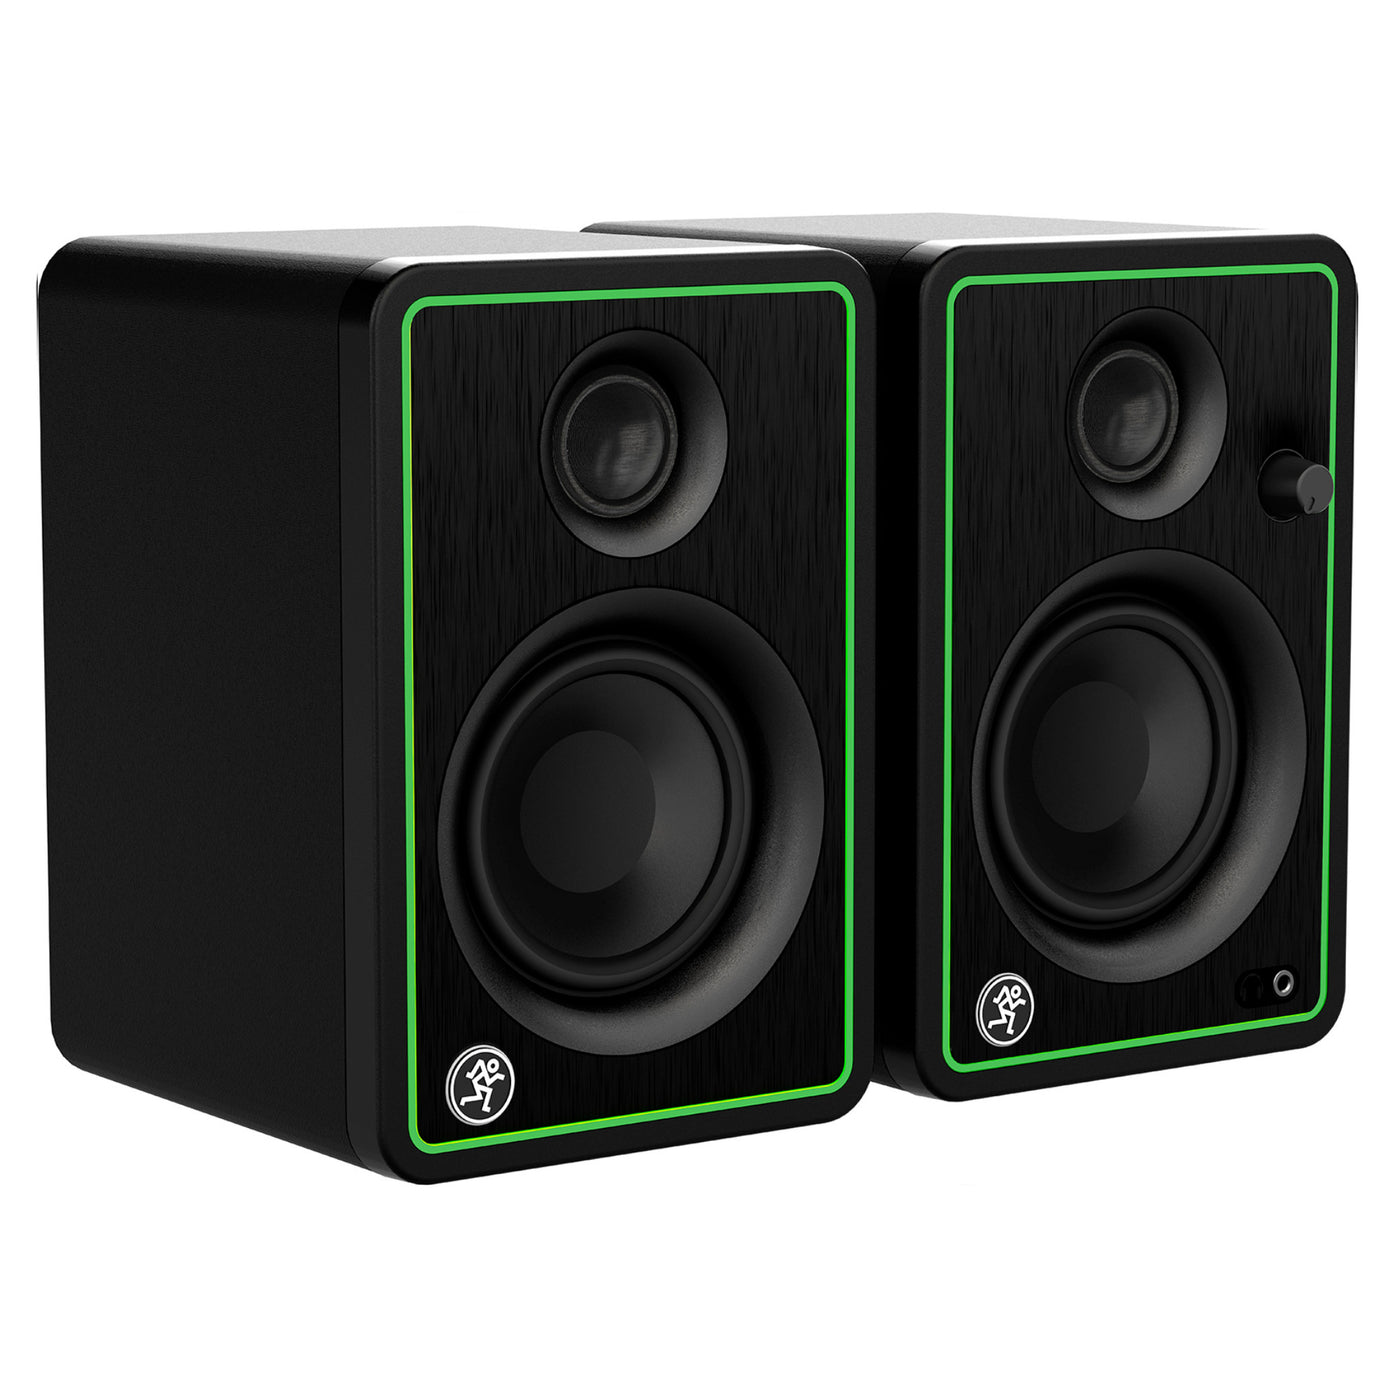 Mackie CR5-XBT 5" Multimedia Monitors with Bluetooth (Pair)